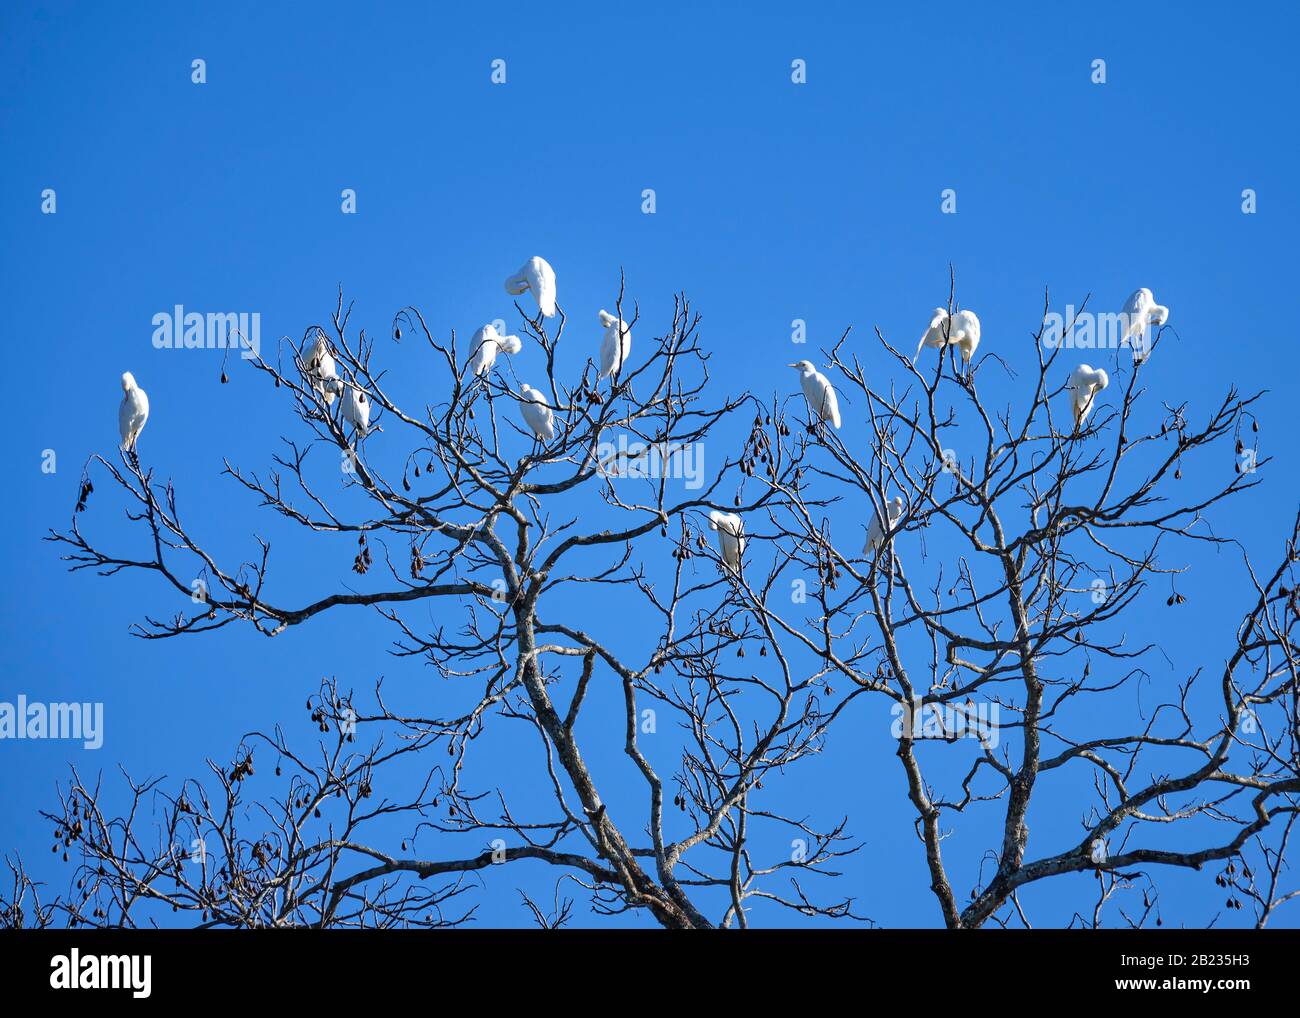 A flock of white cattle egrets are perched in a leafless tree with a beautiful blue sky background in San Mateo, Costa Rica. Stock Photo